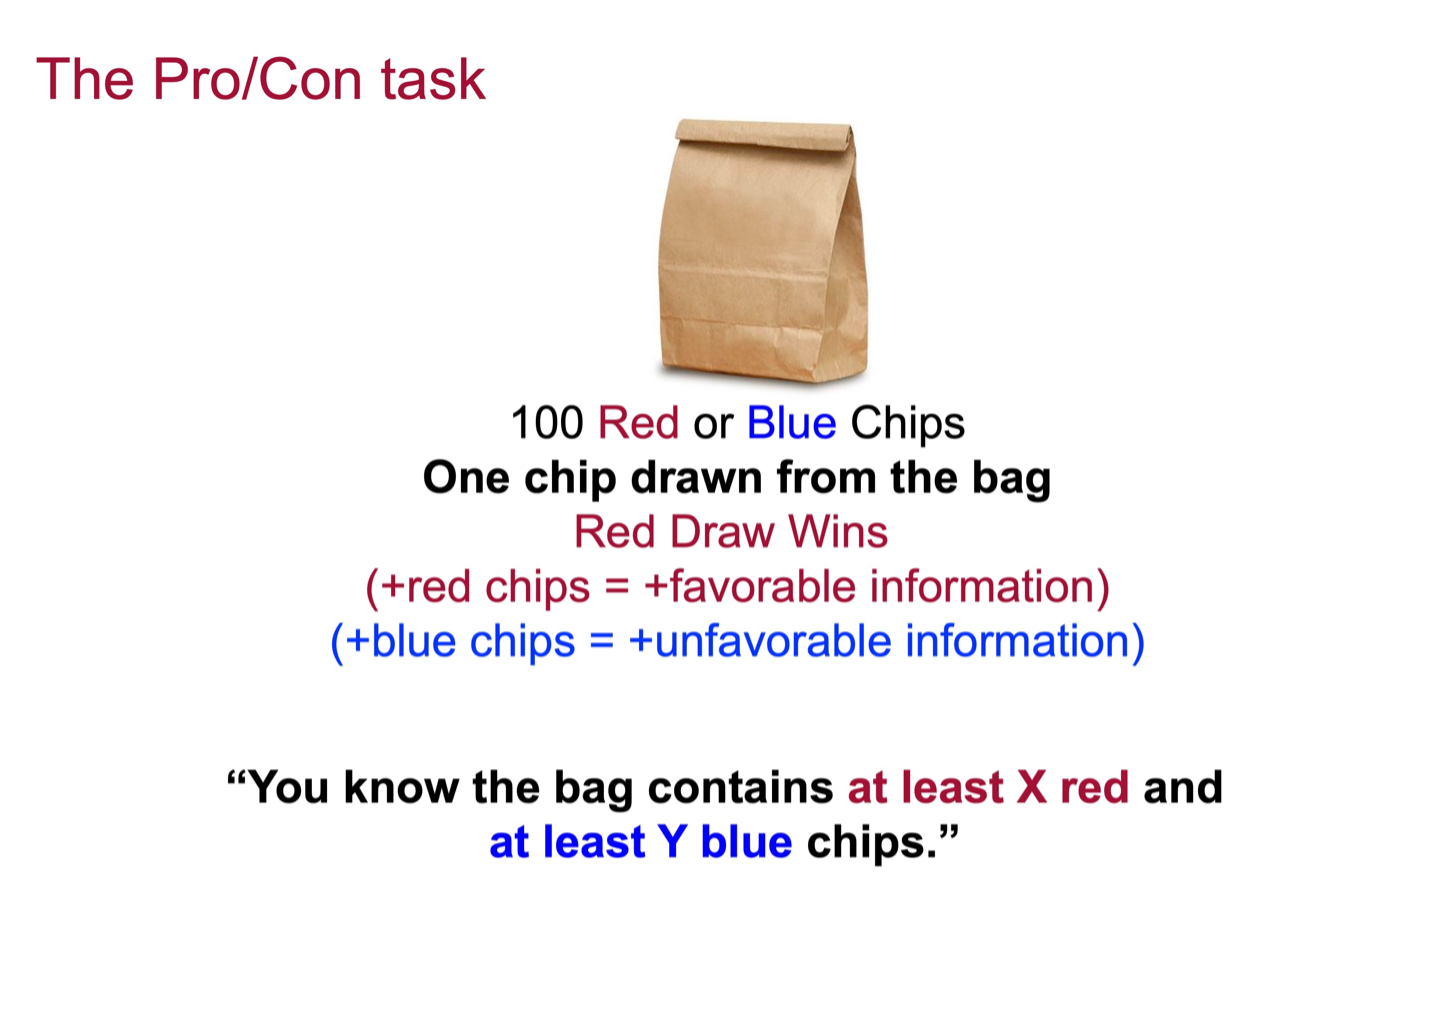 An example of the Pro/Con task used in the experiments. The image contains a brown paper bag, and the following text: “100 Red or Blue Chips. One chip drawn from the bag. Red Draw Wins (+ red chips = +favorable information) (+blue chips = +unfavorable information). You know the bag contains at least X red and at least Y blue chips."